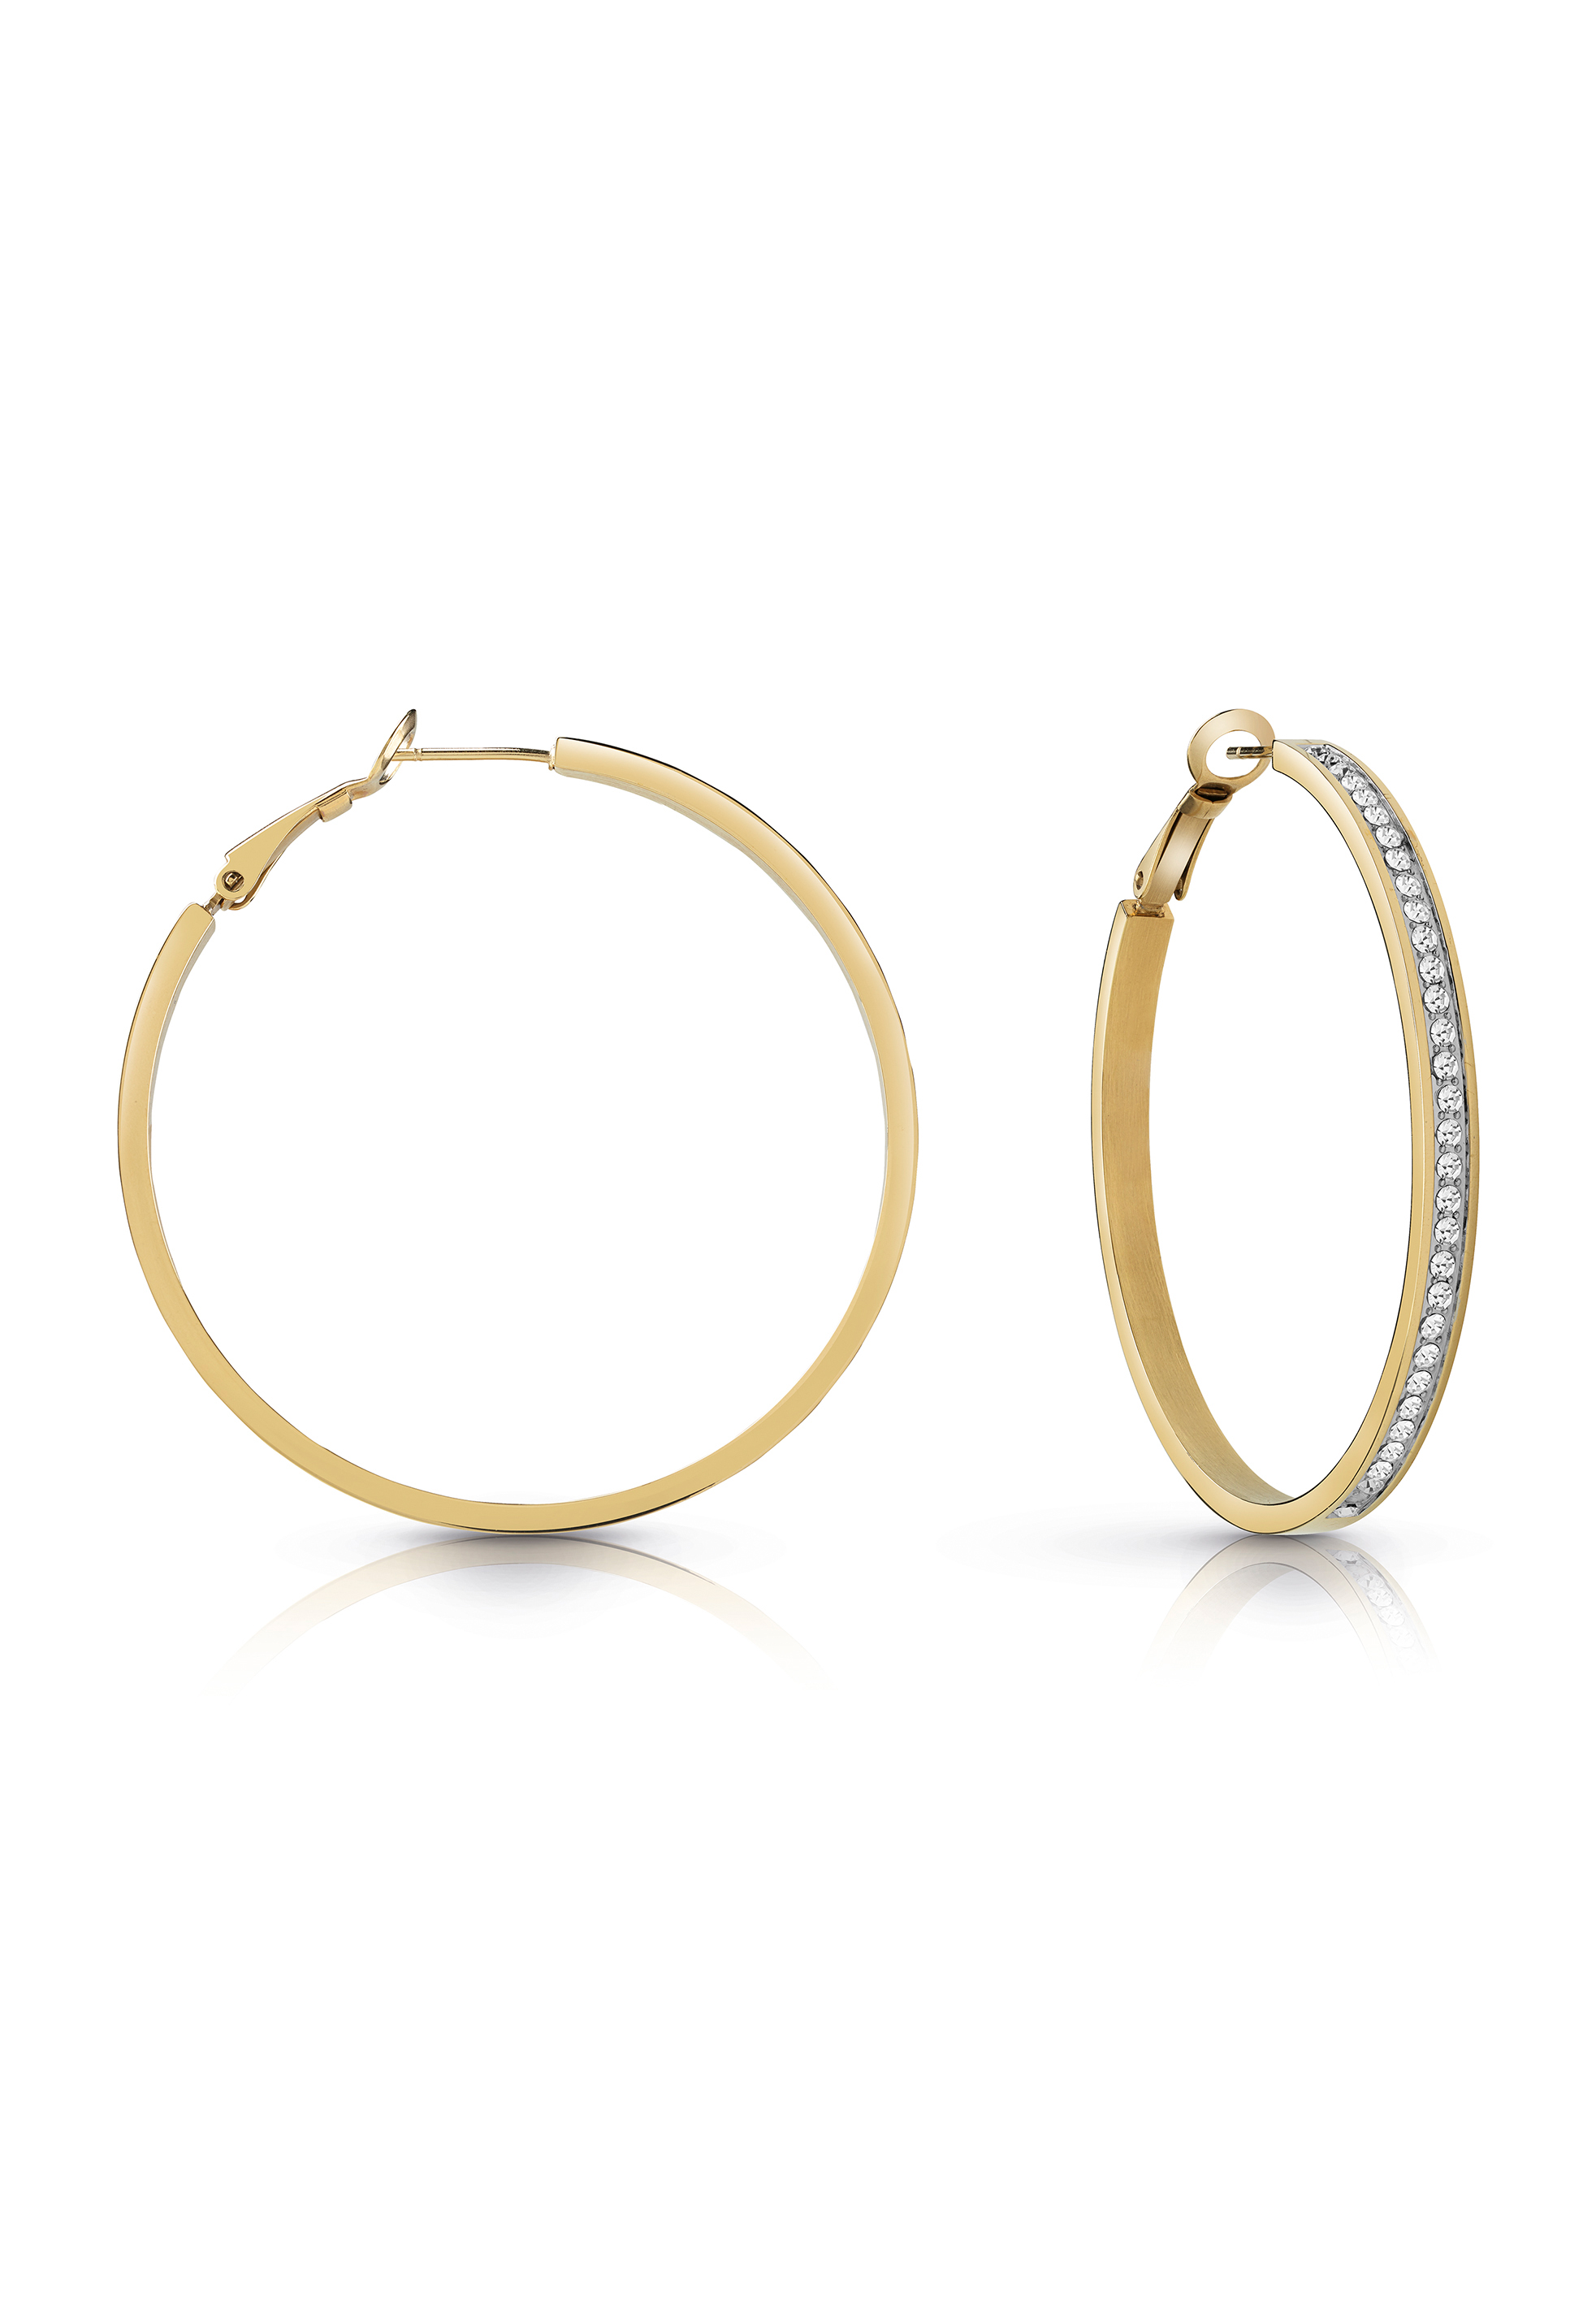 Guess Colour My Day Gold 5cm Hoop Earrings - UBE02247YG